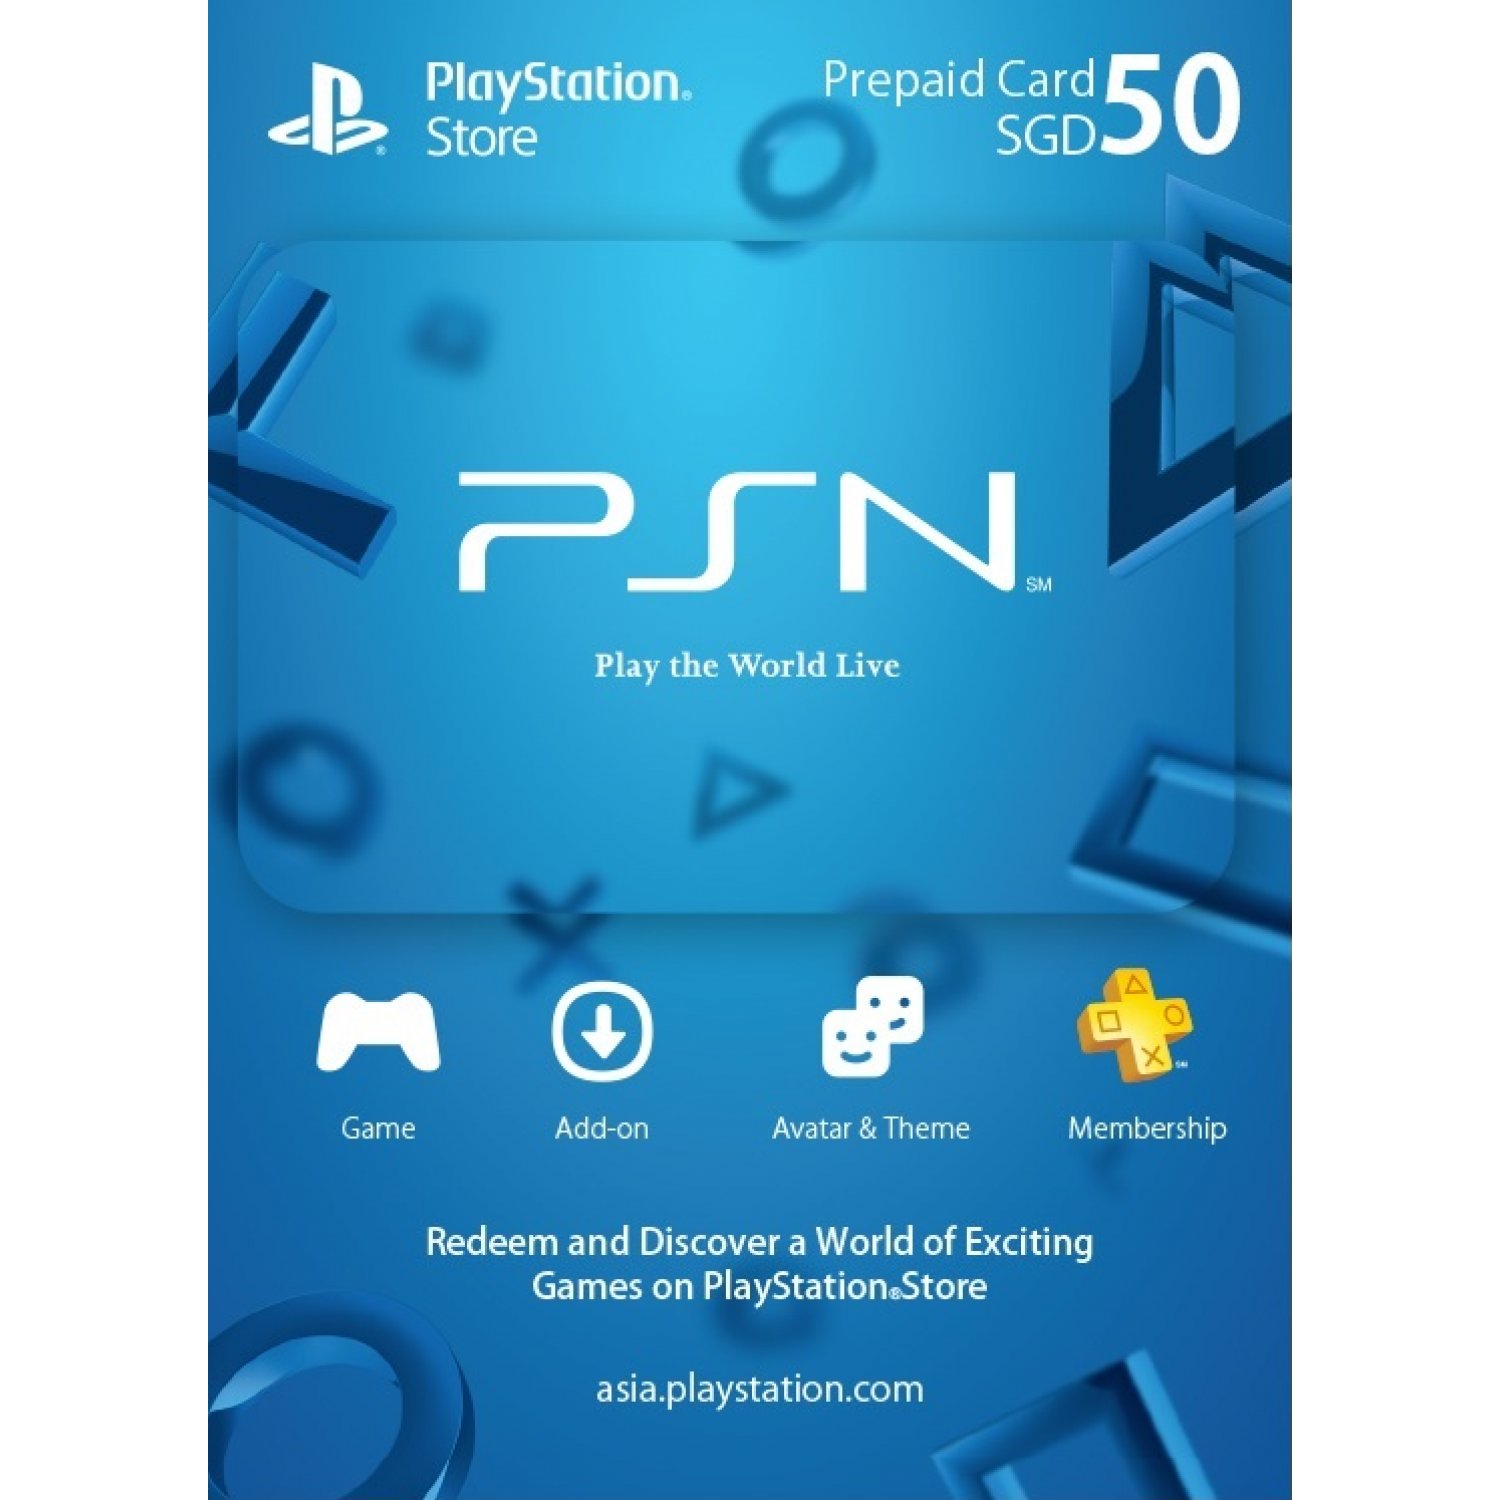 gift playstation store credit